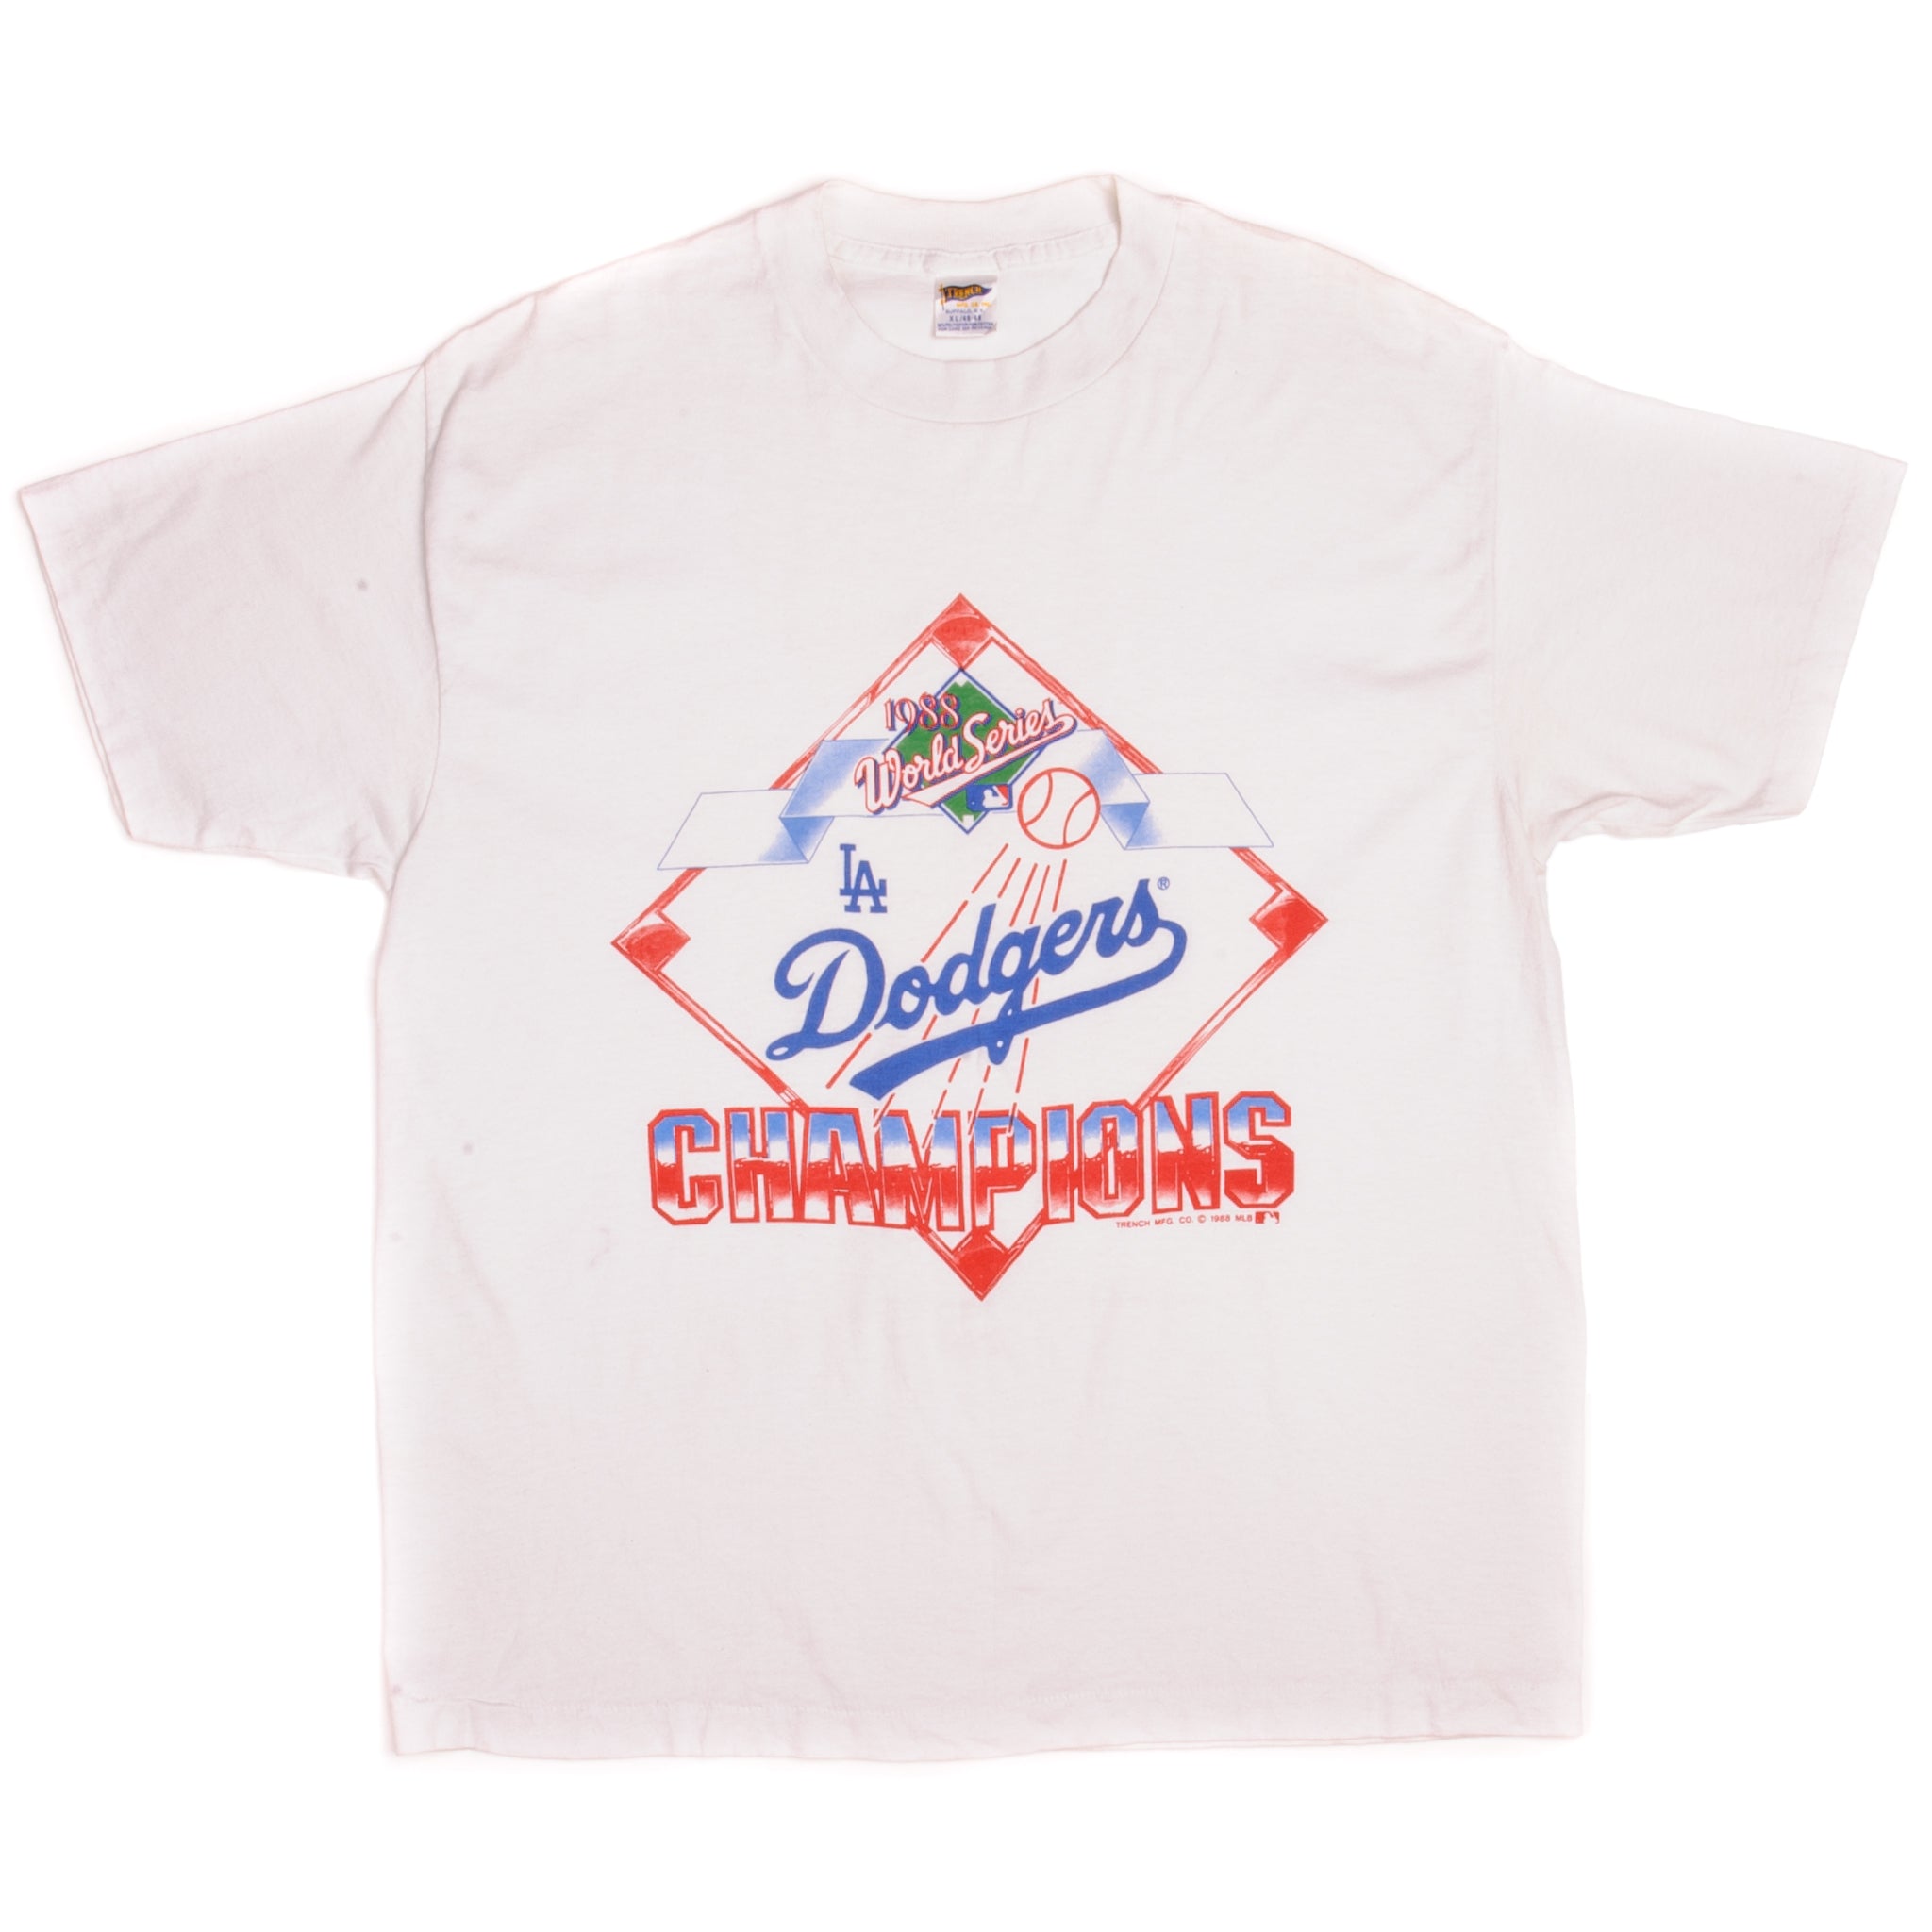 VINTAGE MLB LA DODGERS CHAMPIONS TEE SHIRT 1988 SIZE LARGE MADE IN